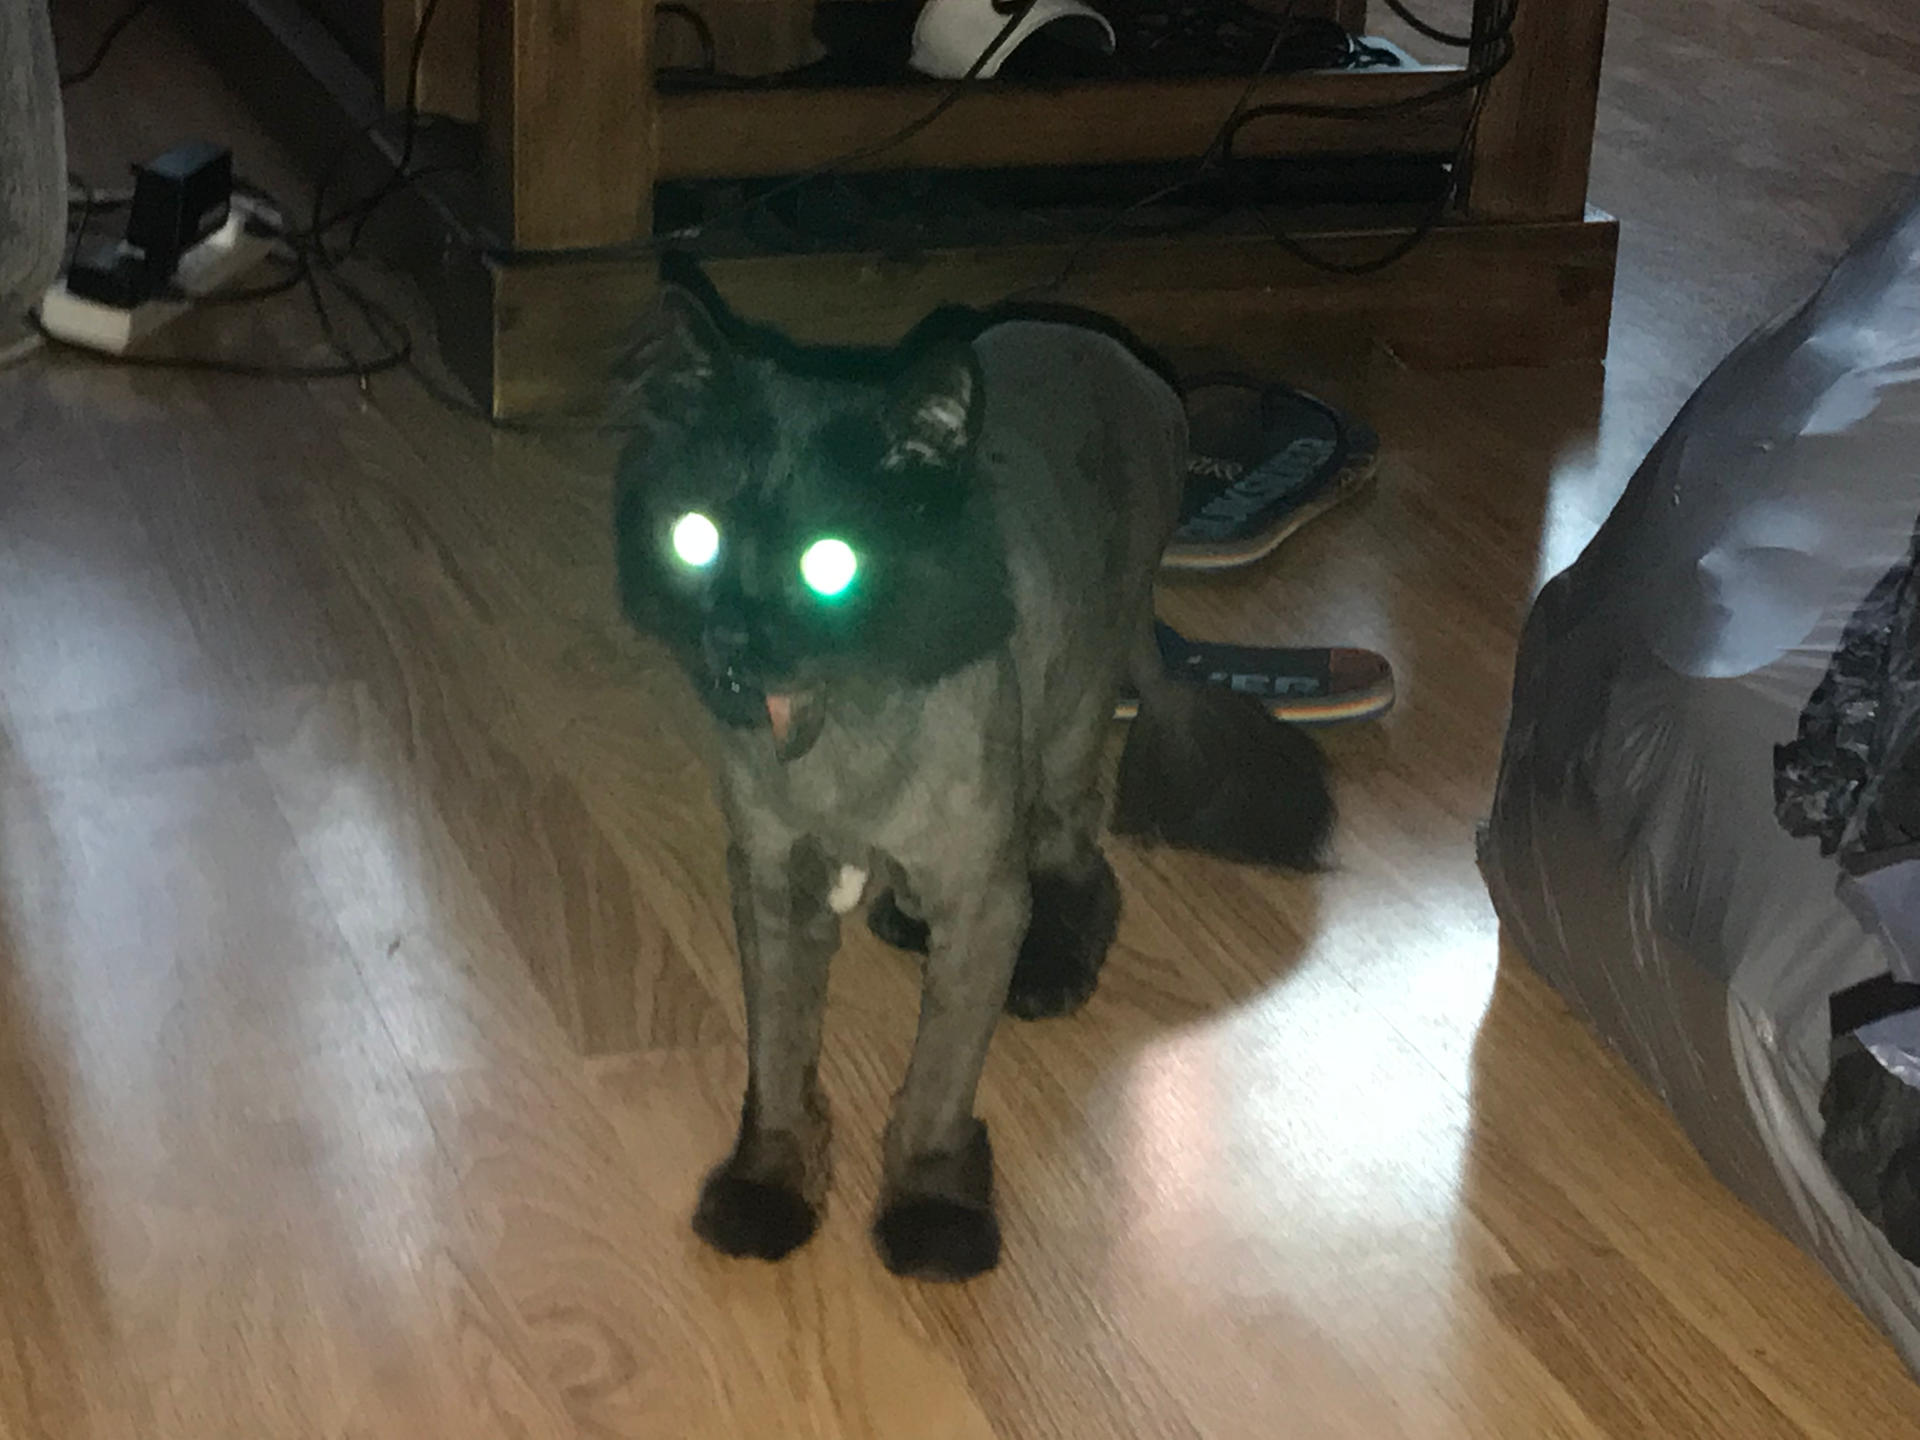 Cursed cat image by SoularWolf4 on DeviantArt